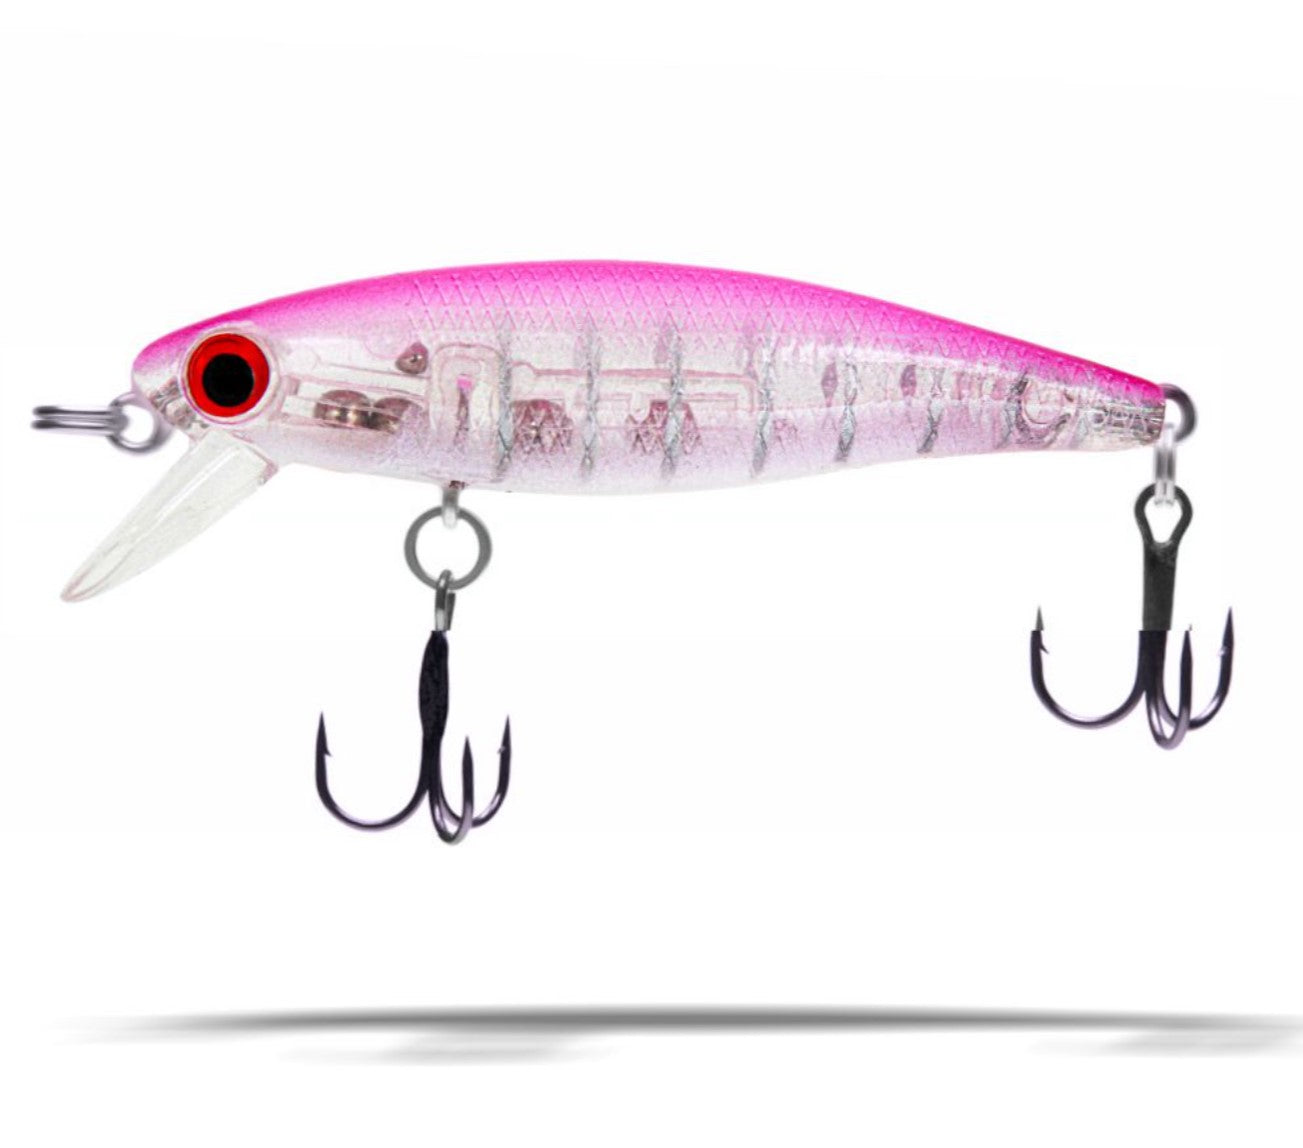 Dynamic Lures HD Trout (Bubble Gum) – Trophy Trout Lures and Fly Fishing